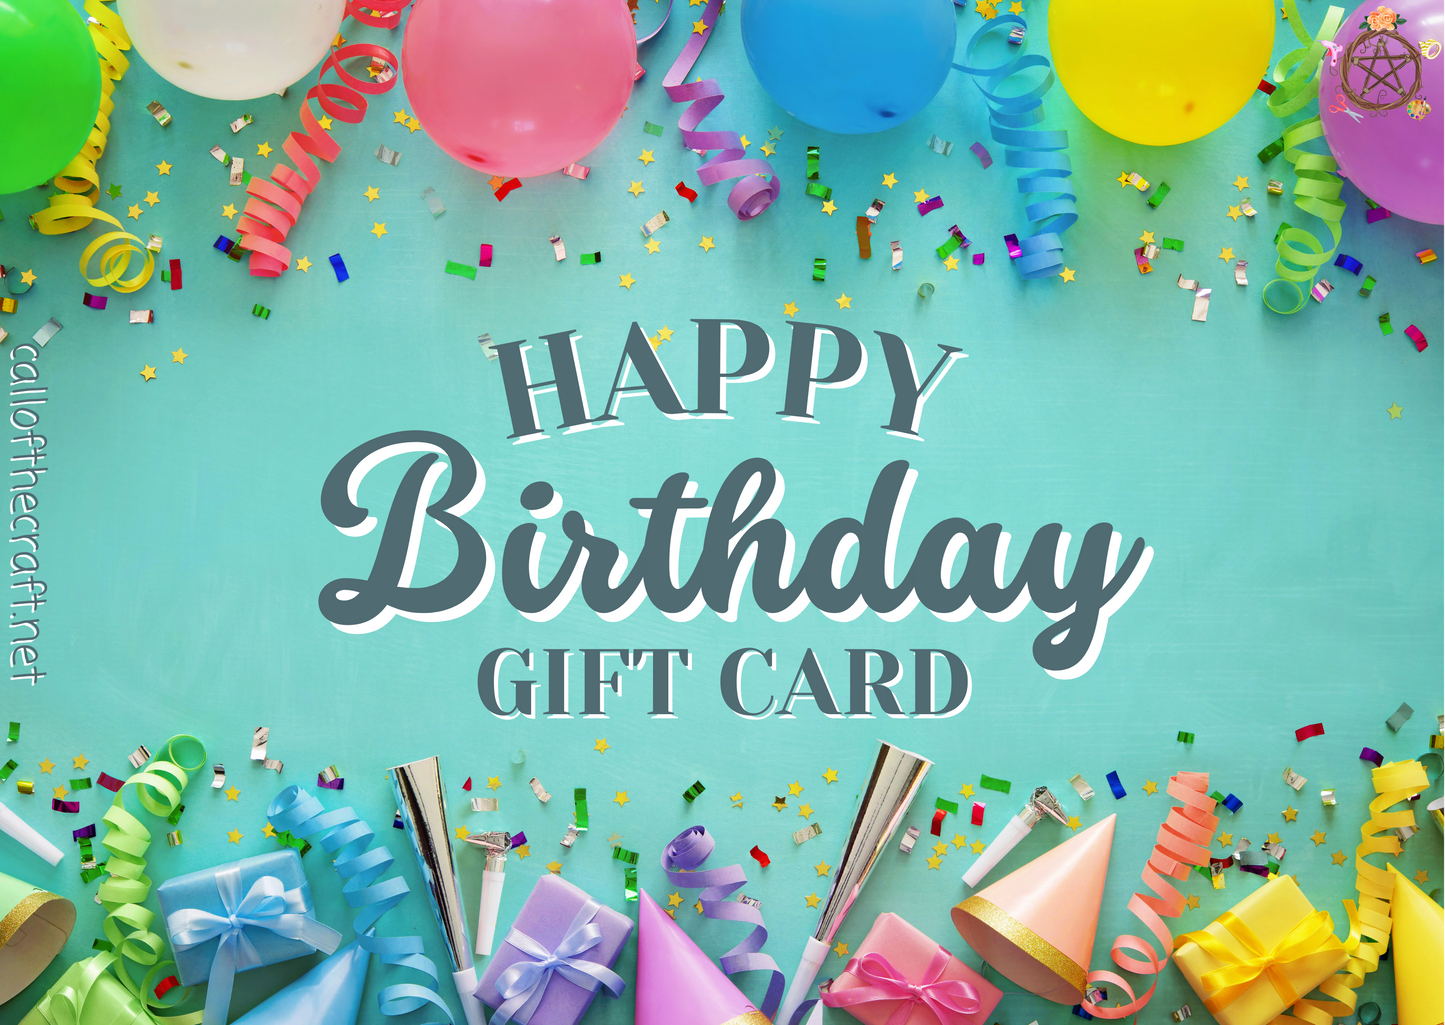 Happy Birthday Confetti Gift Card - The Call of the Craft